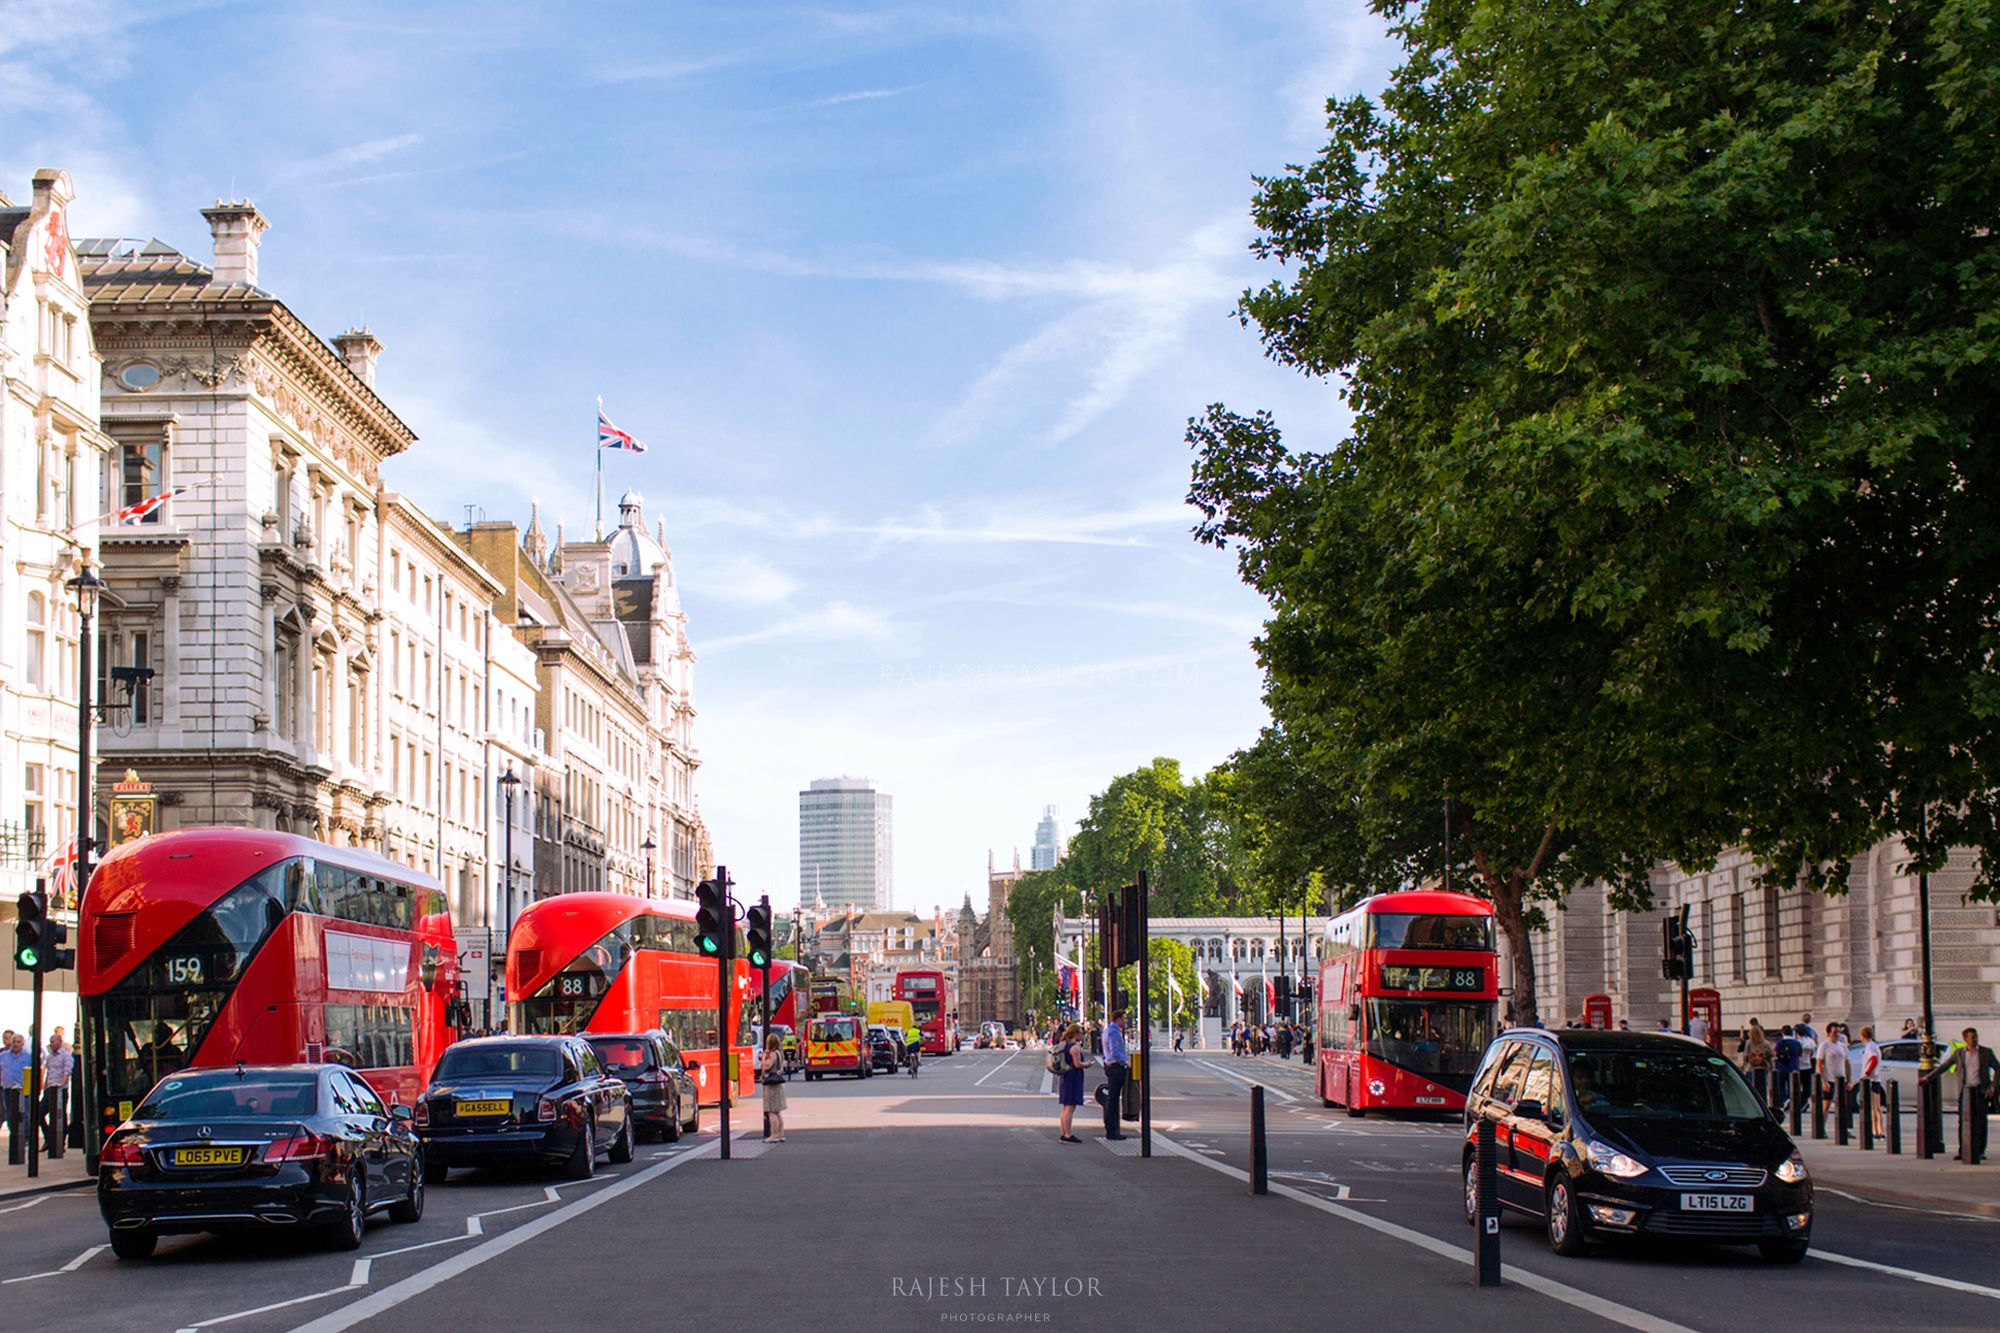 Whitehall towards Parliament Square, City of Westminster: Rajesh Taylor ©